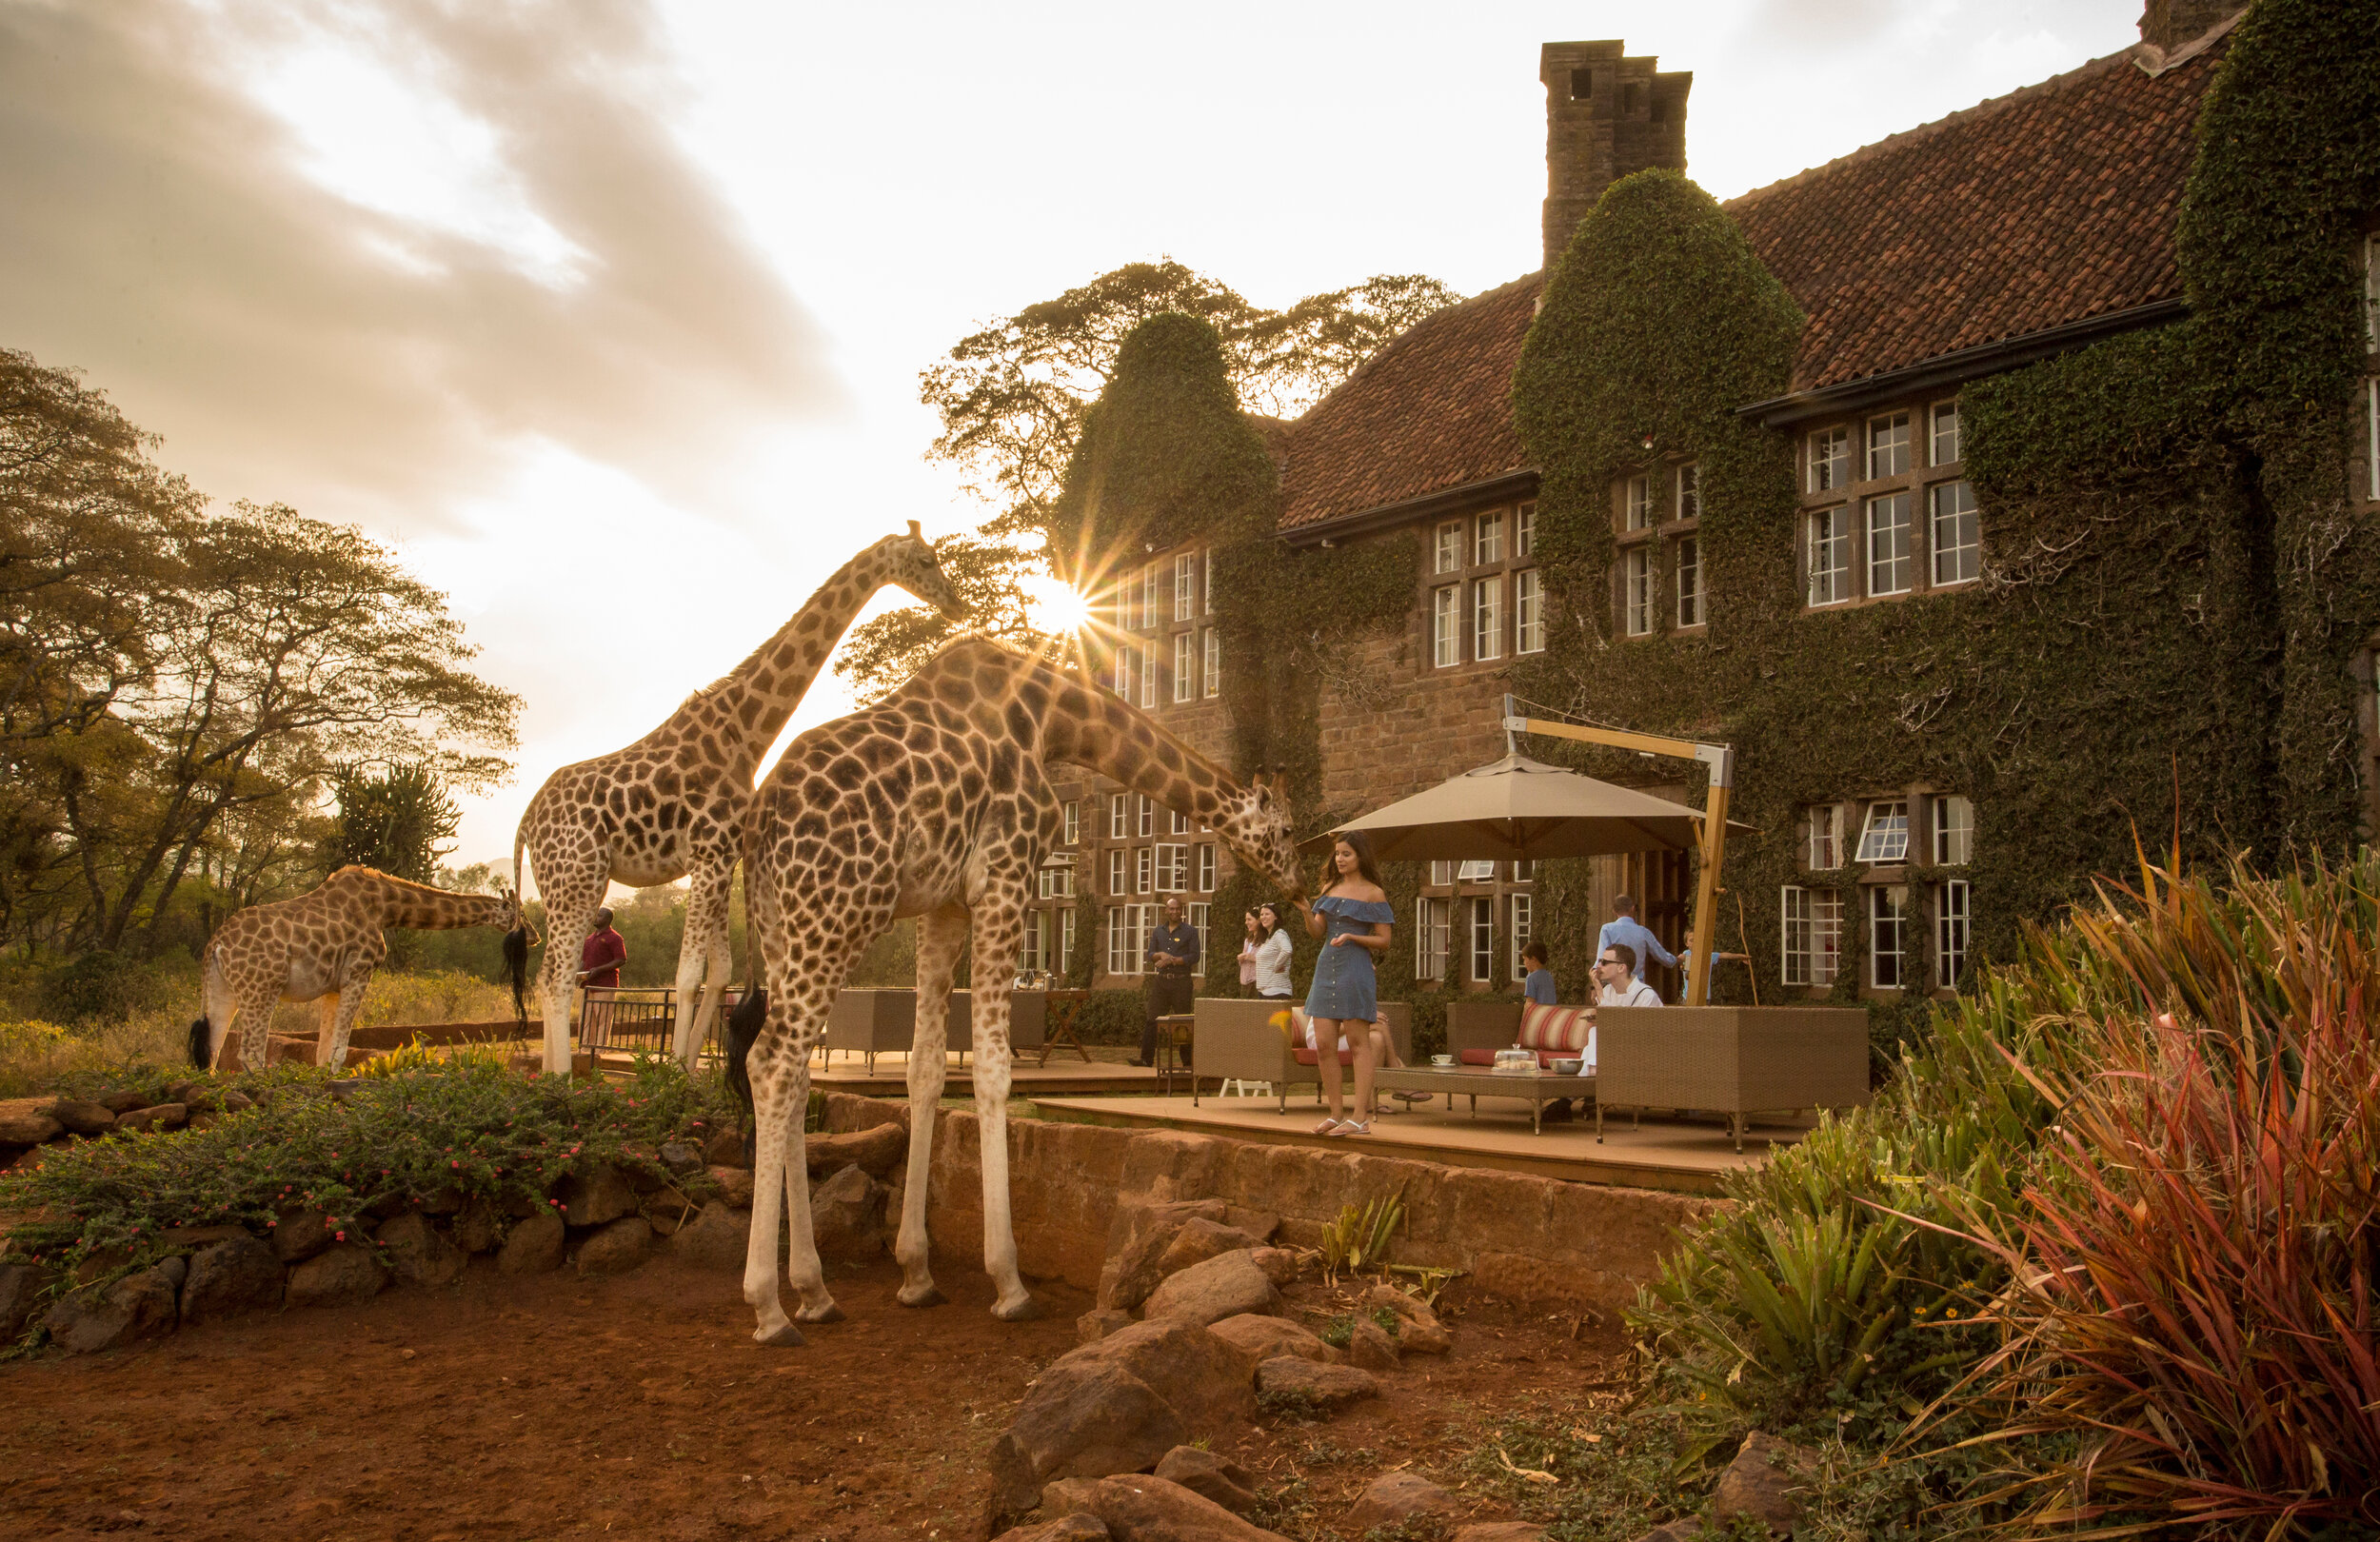   The beautiful exterior of Giraffe Manor, which wouldn’t be complete without a couple of giraffes (photo credit: Janine Cifelli Representation)  